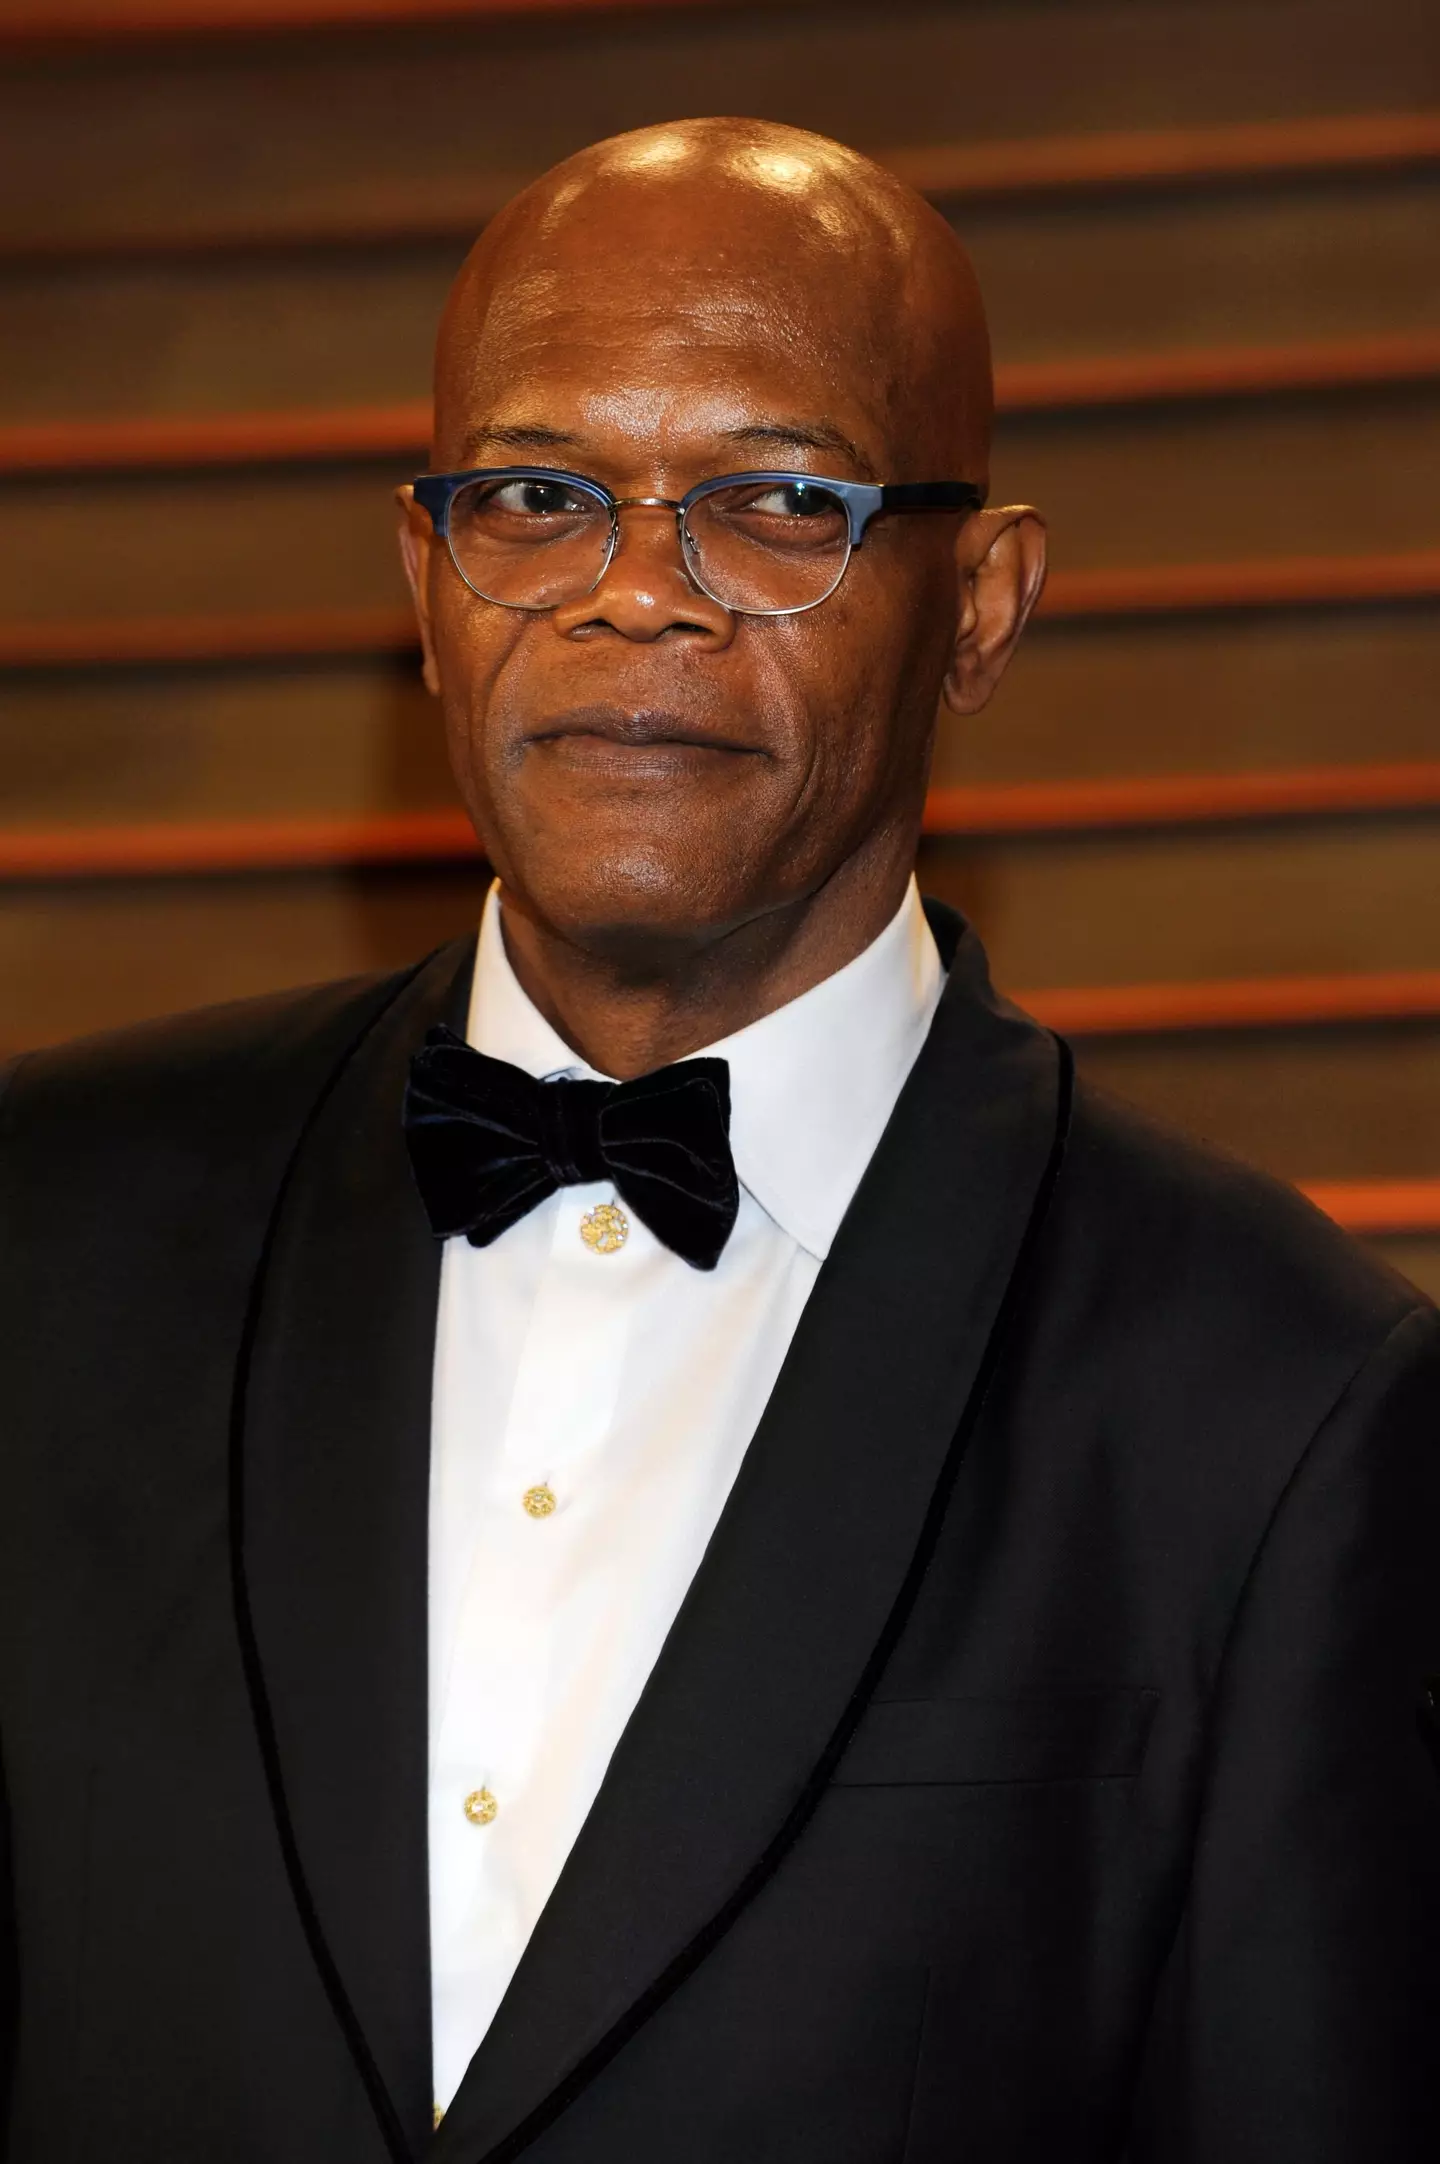 Samuel L. Jackson missed out on the Tony Award.